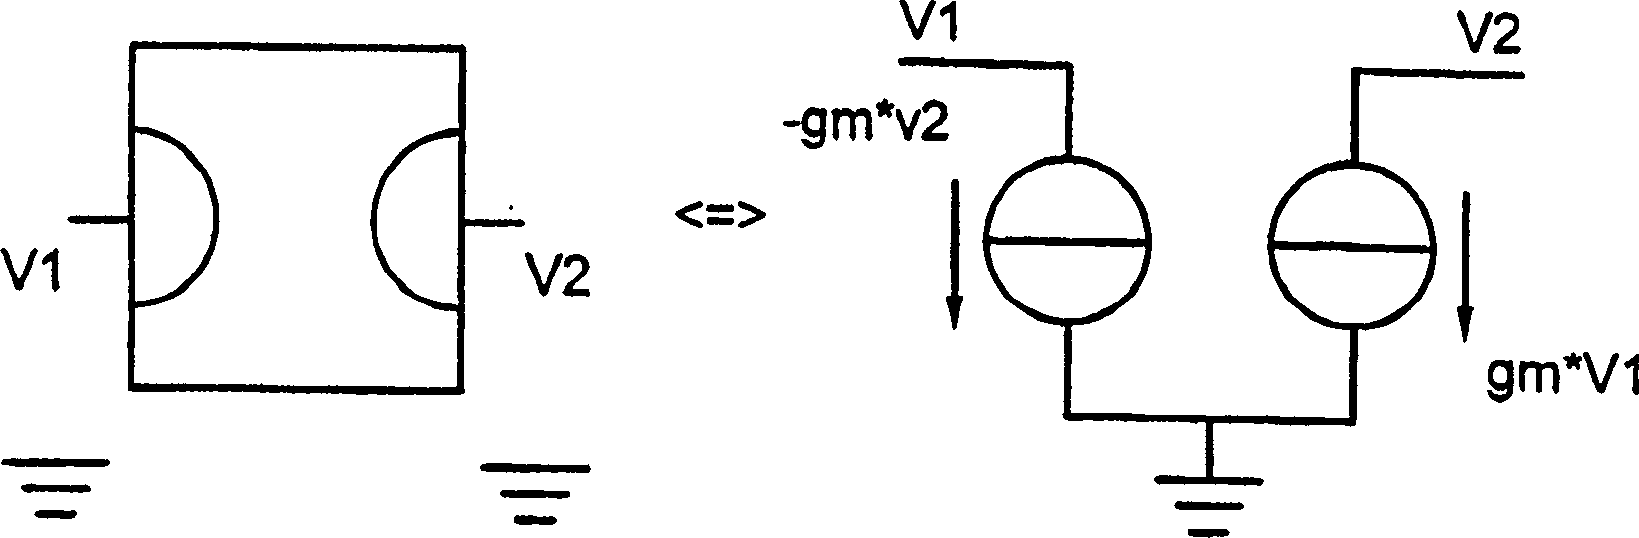 Phase-compensated impedance converter